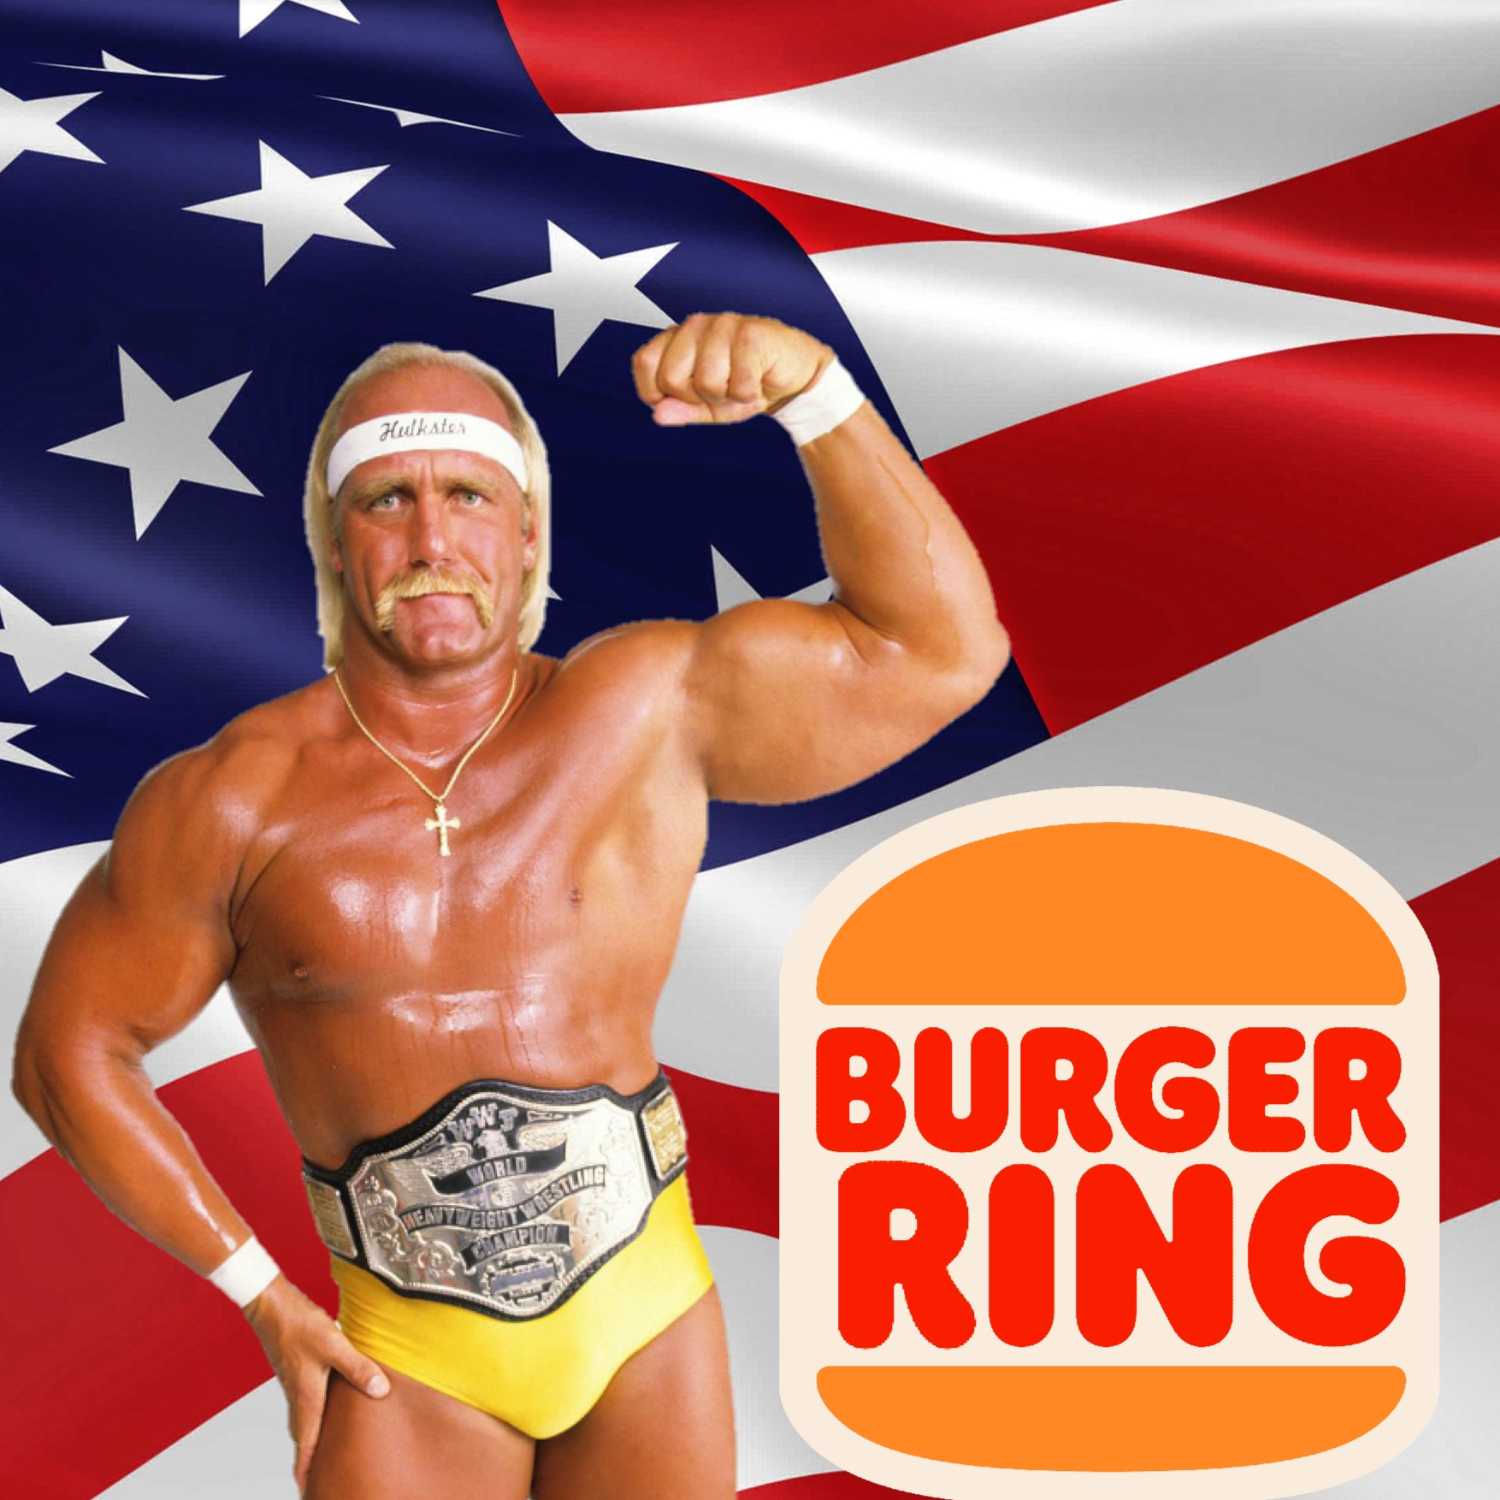 # 25 BURGER RING Chatiment divin